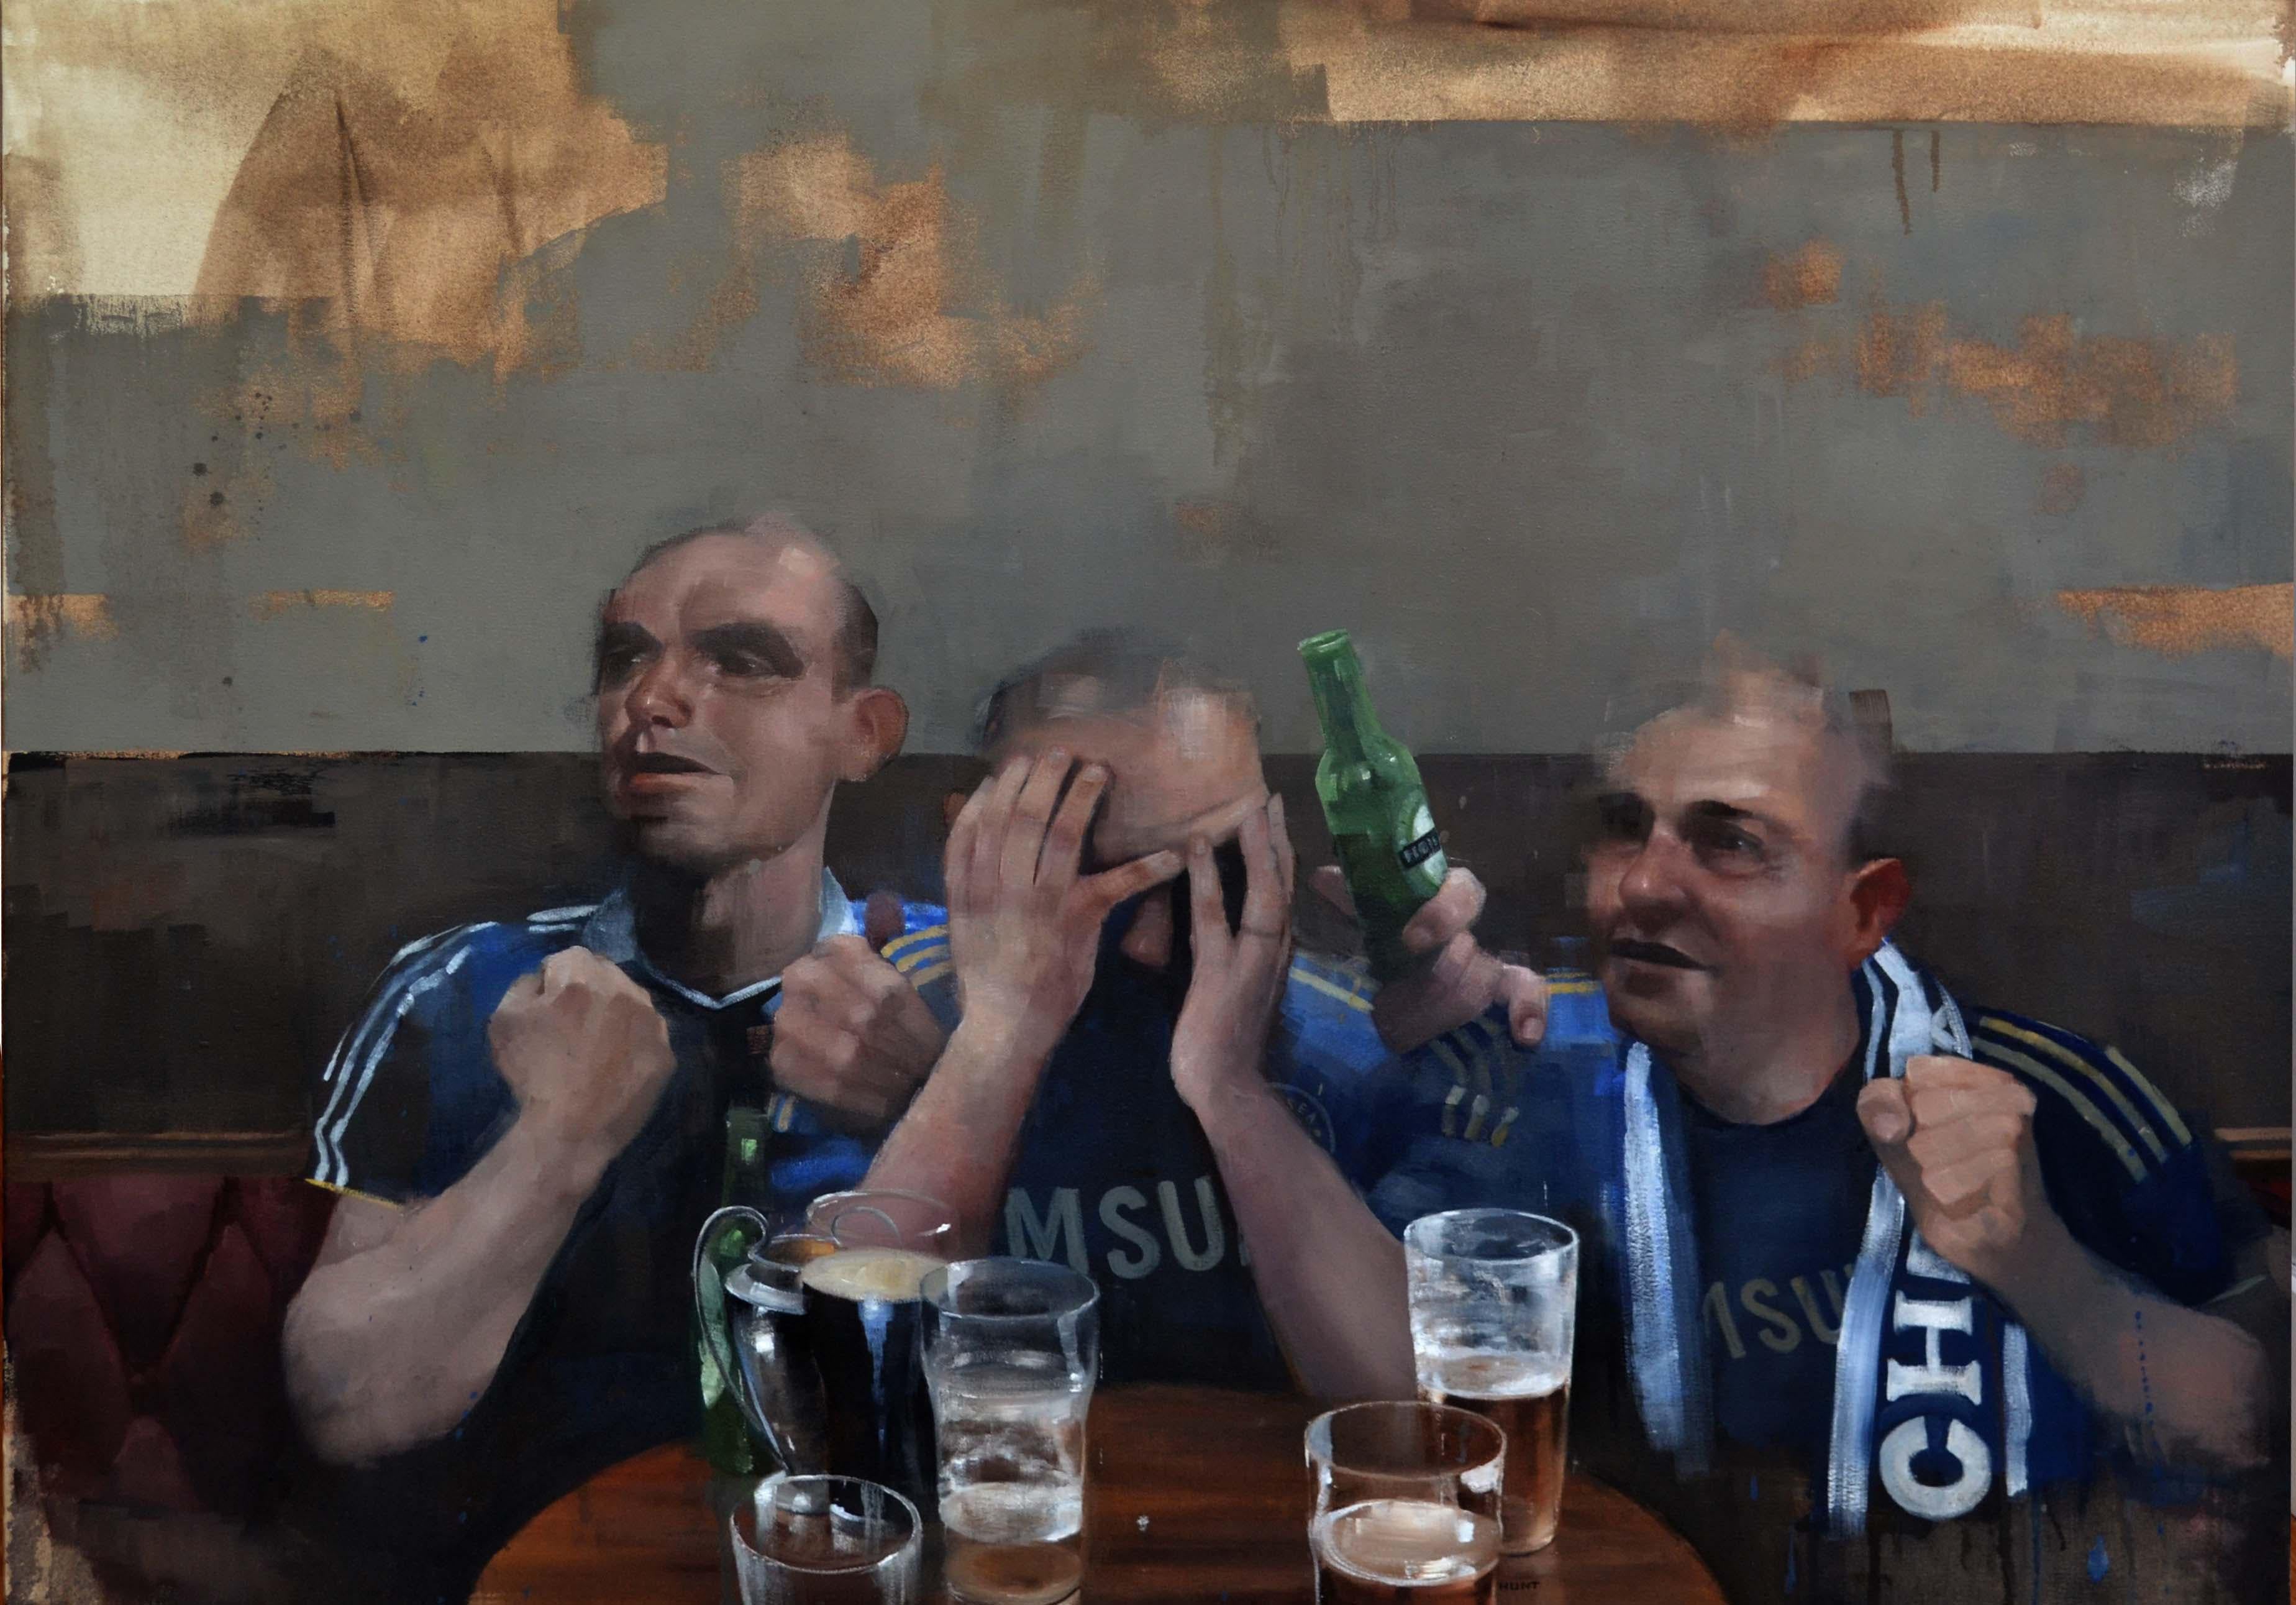 Andrew Hunt's Shoot Out is a 21st Century oil on canvas painting in figurative realism style depicting three football supporters sitting down in a pub. Hunt’s blend of painterly realism with his understanding of human character gives him the ability